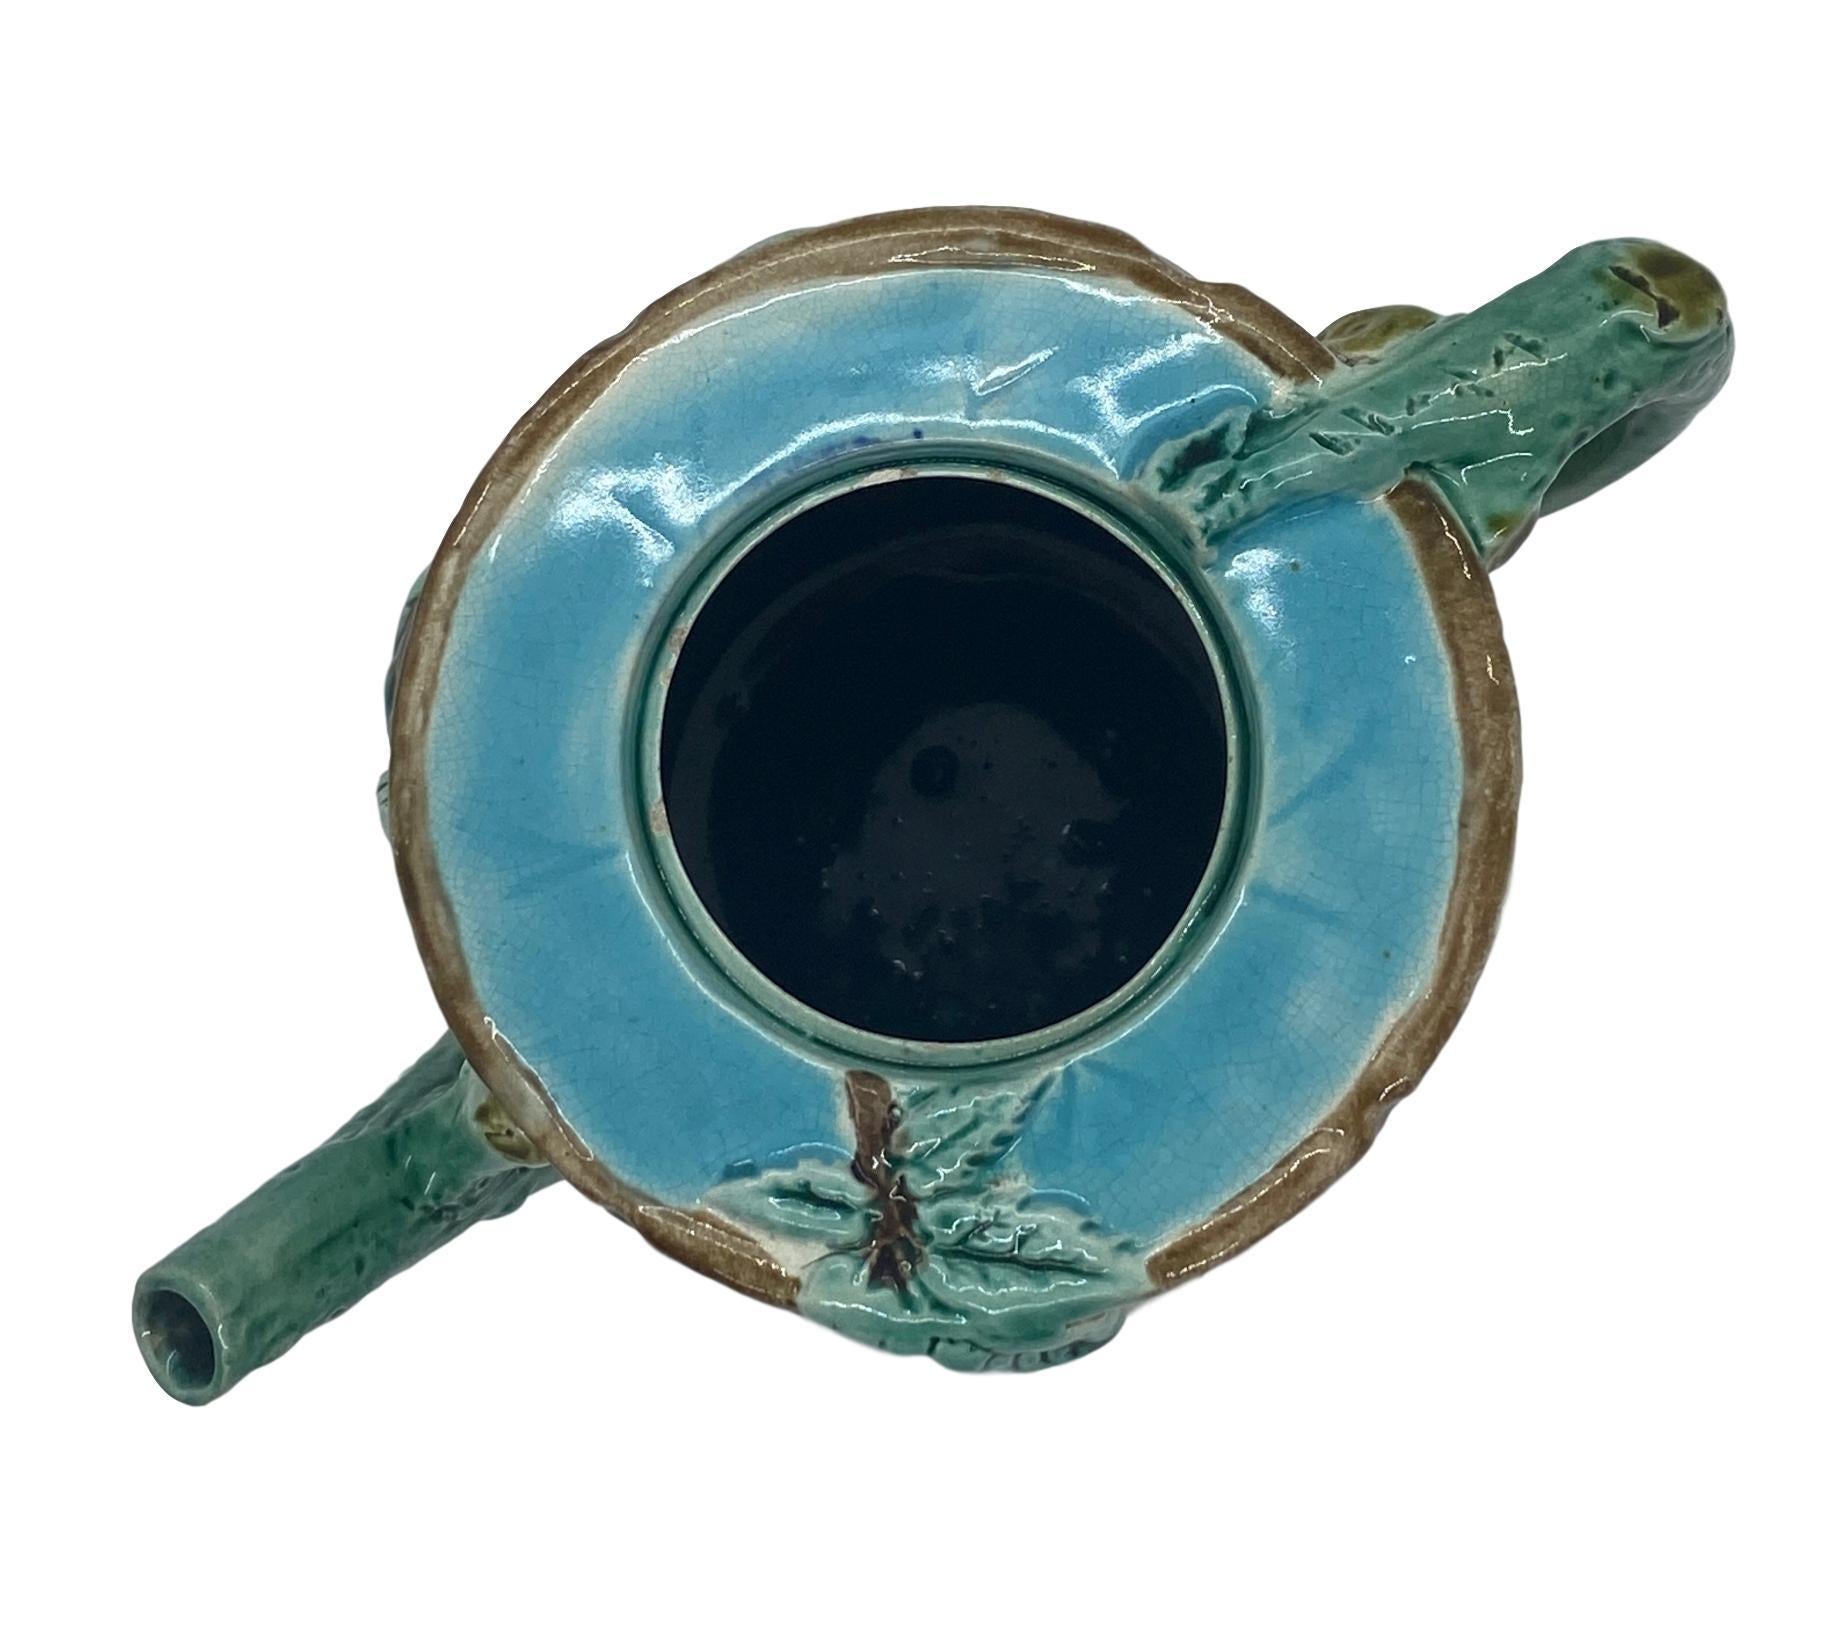 Holdcroft Majolica Blackberry on Tree Trunk Teapot, Turquoise Blue Cover c. 1877 For Sale 1